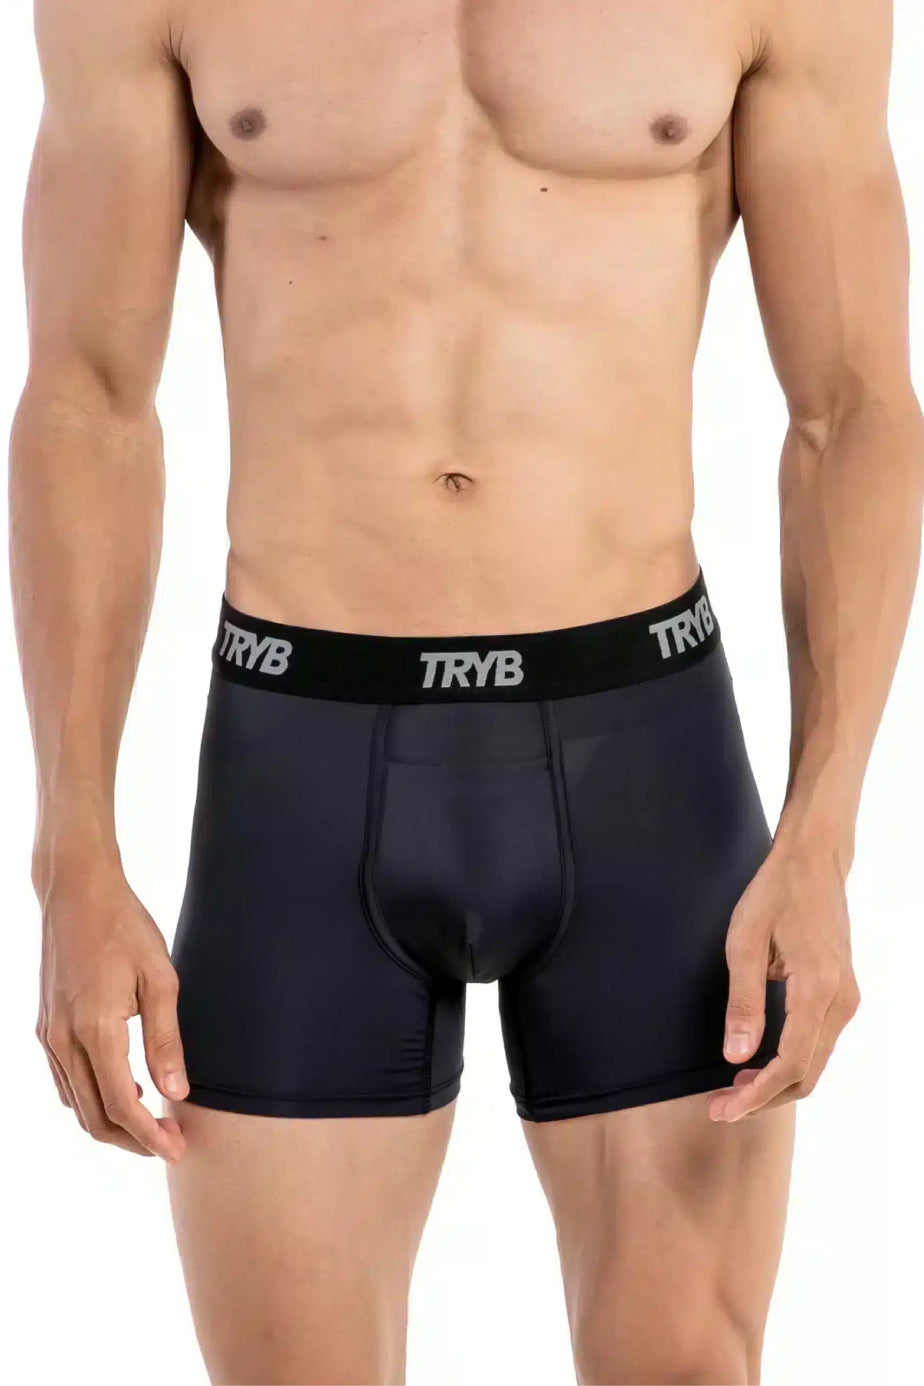 Created for Fitness, Designed for Life  INDIA'S 1ST SPORTS INNERWEAR –  Trybwear